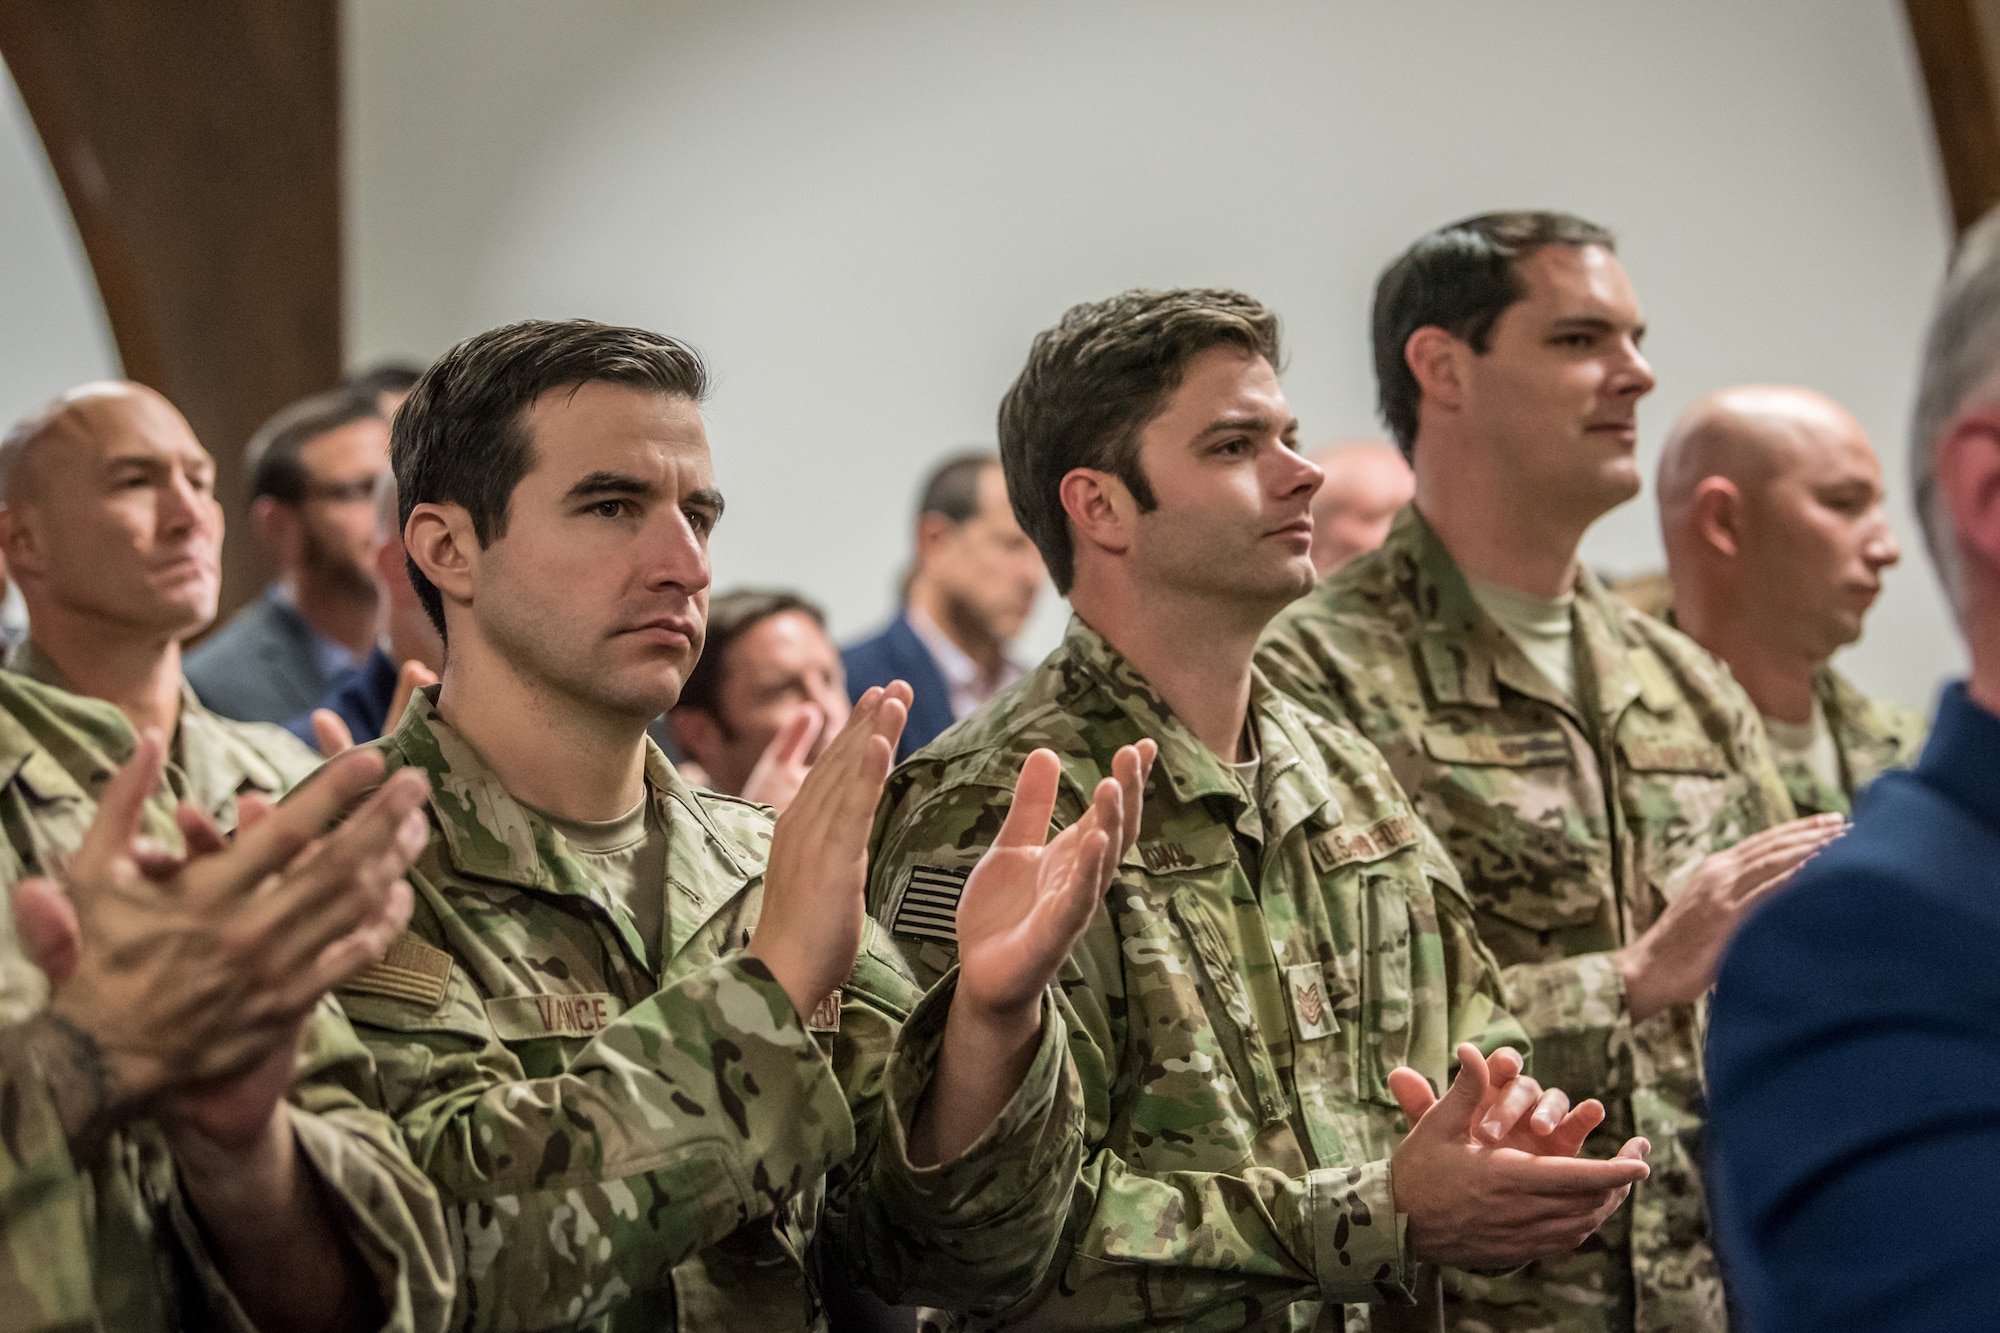 Hundreds of friends, family and co-workers attend a retirement ceremony at the Kentucky Air National Guard Base in Louisville, Ky., on Dec 7, 2019, to pay their respects to Chief Master Sgt. Aaron May, the outgoing chief enlisted manager for the 123rd Special Tactics Squadron. May is retiring after more than 26 years of service to the Kentucky Air National Guard and U.S. Air Force. (U.S. Air National Guard photo by Staff Sgt. Joshua Horton)